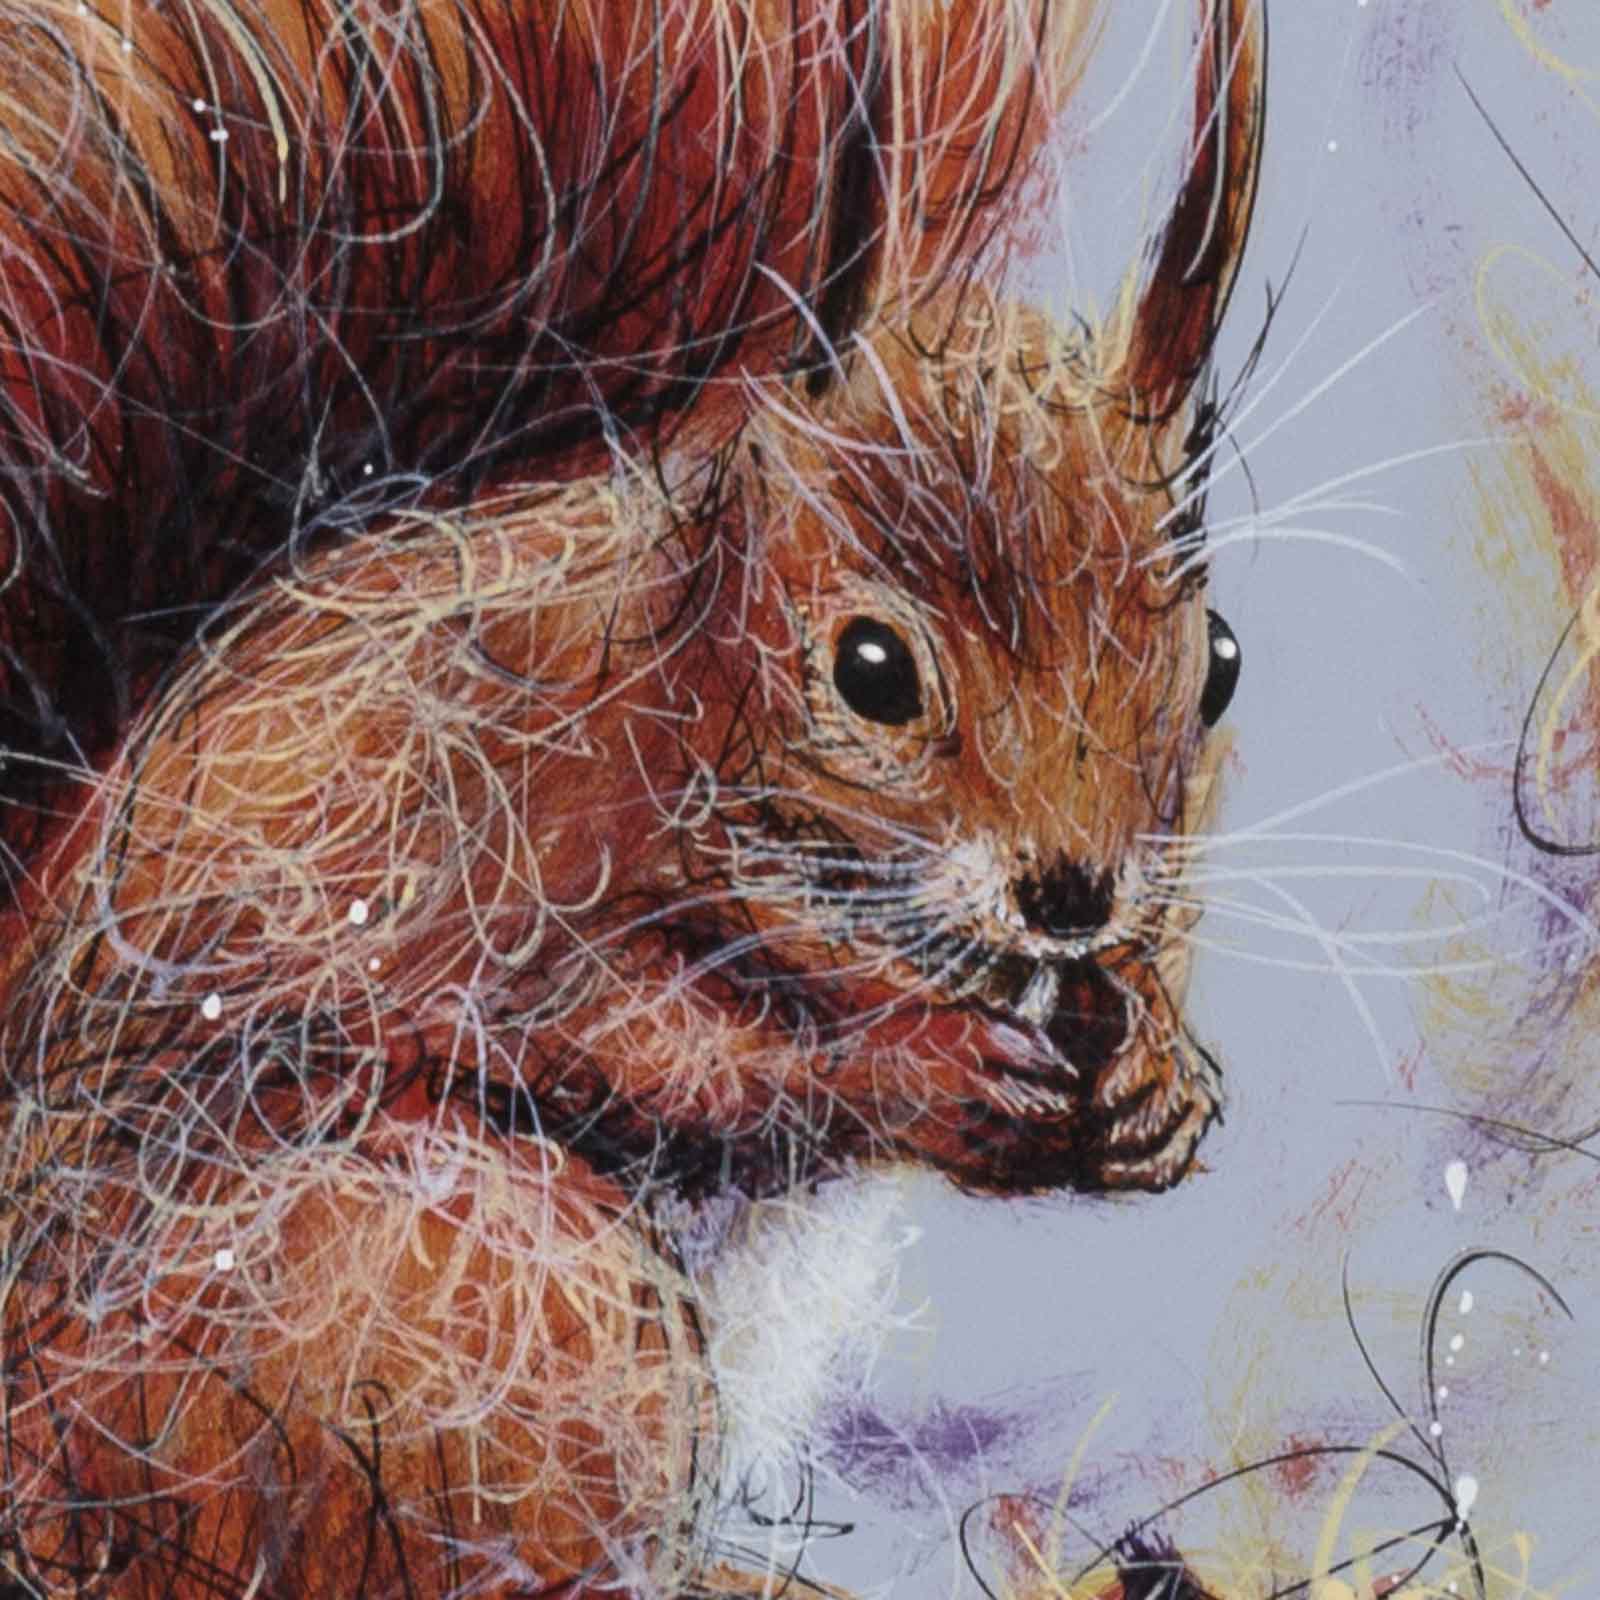 Rupert the Red Squirrel